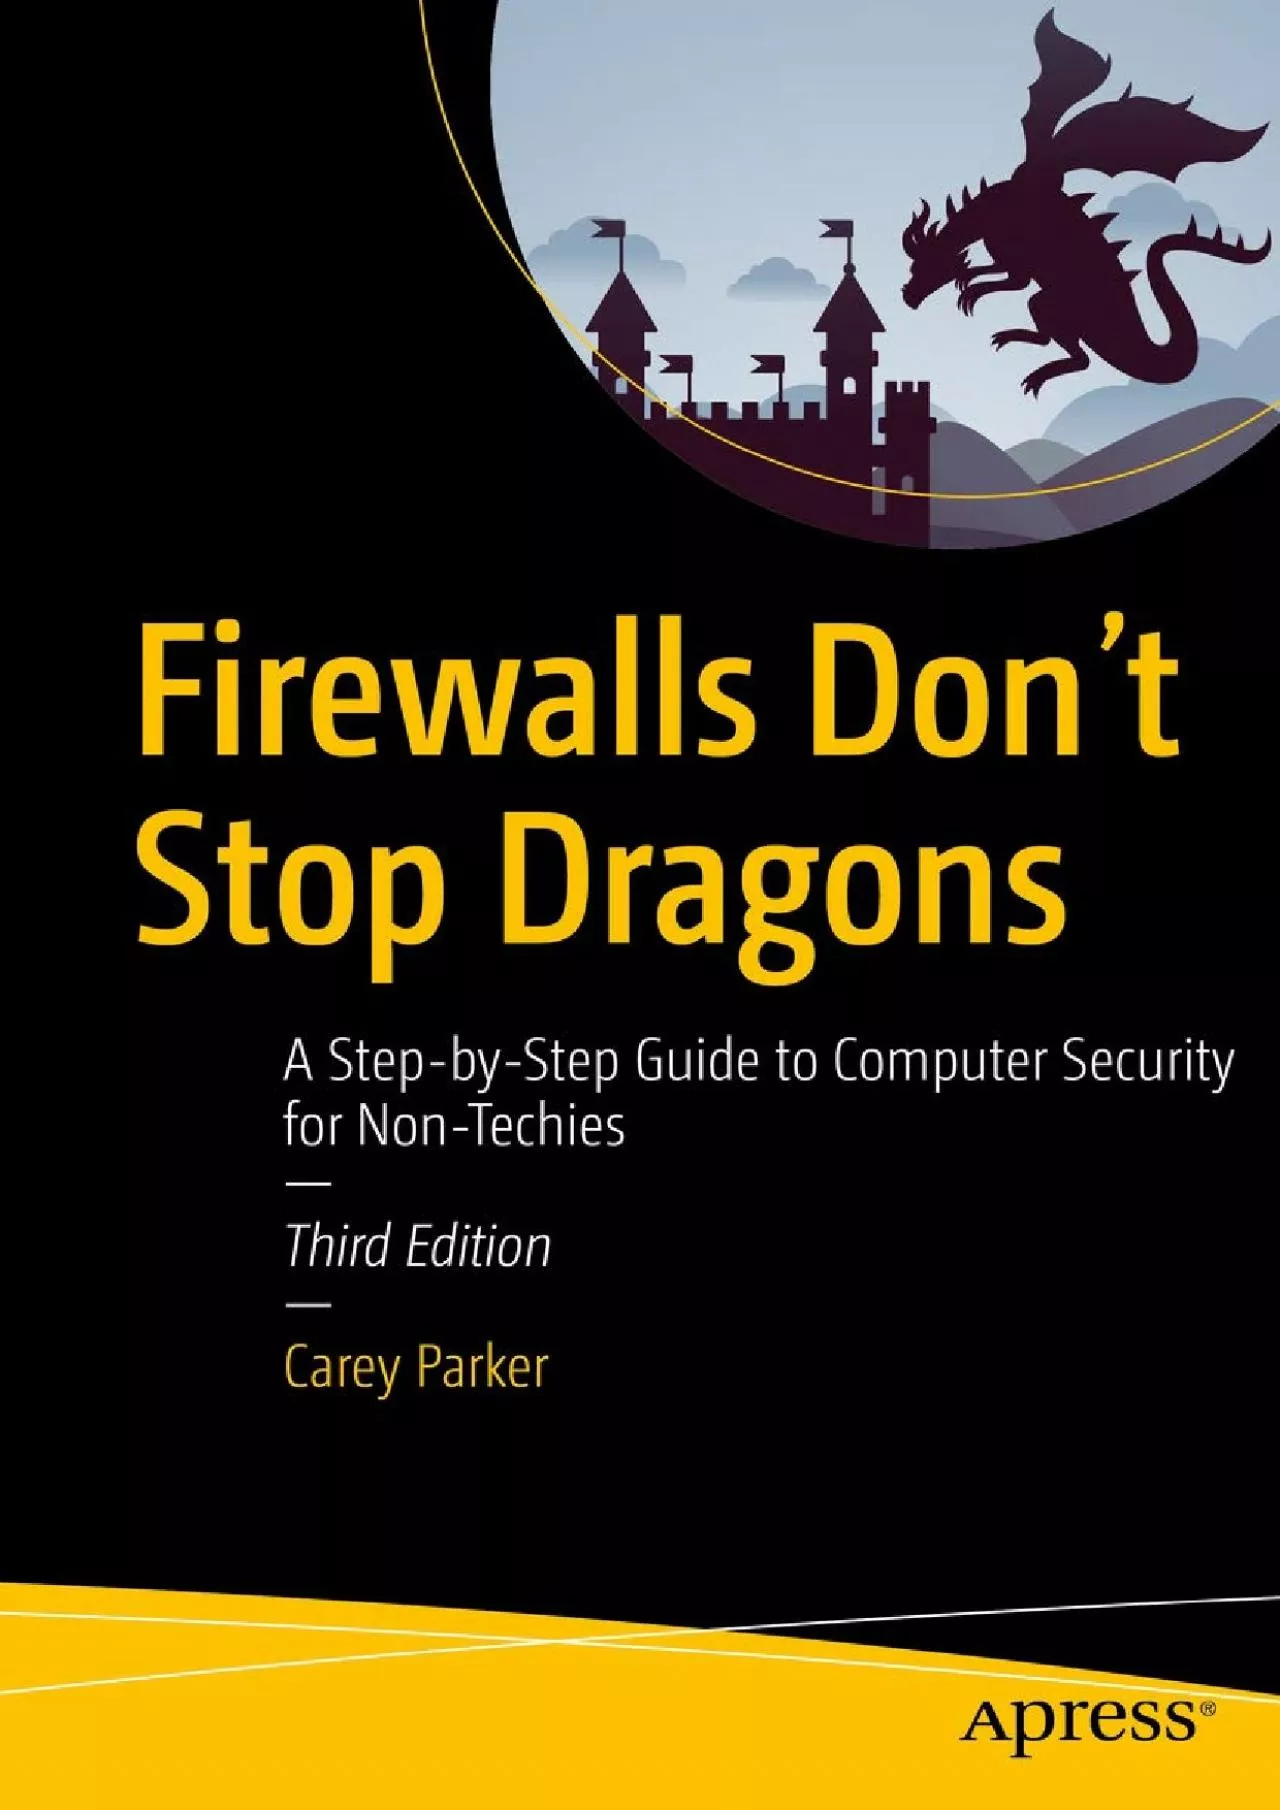 [READING BOOK]-Firewalls Don\'t Stop Dragons: A Step-by-Step Guide to Computer Security